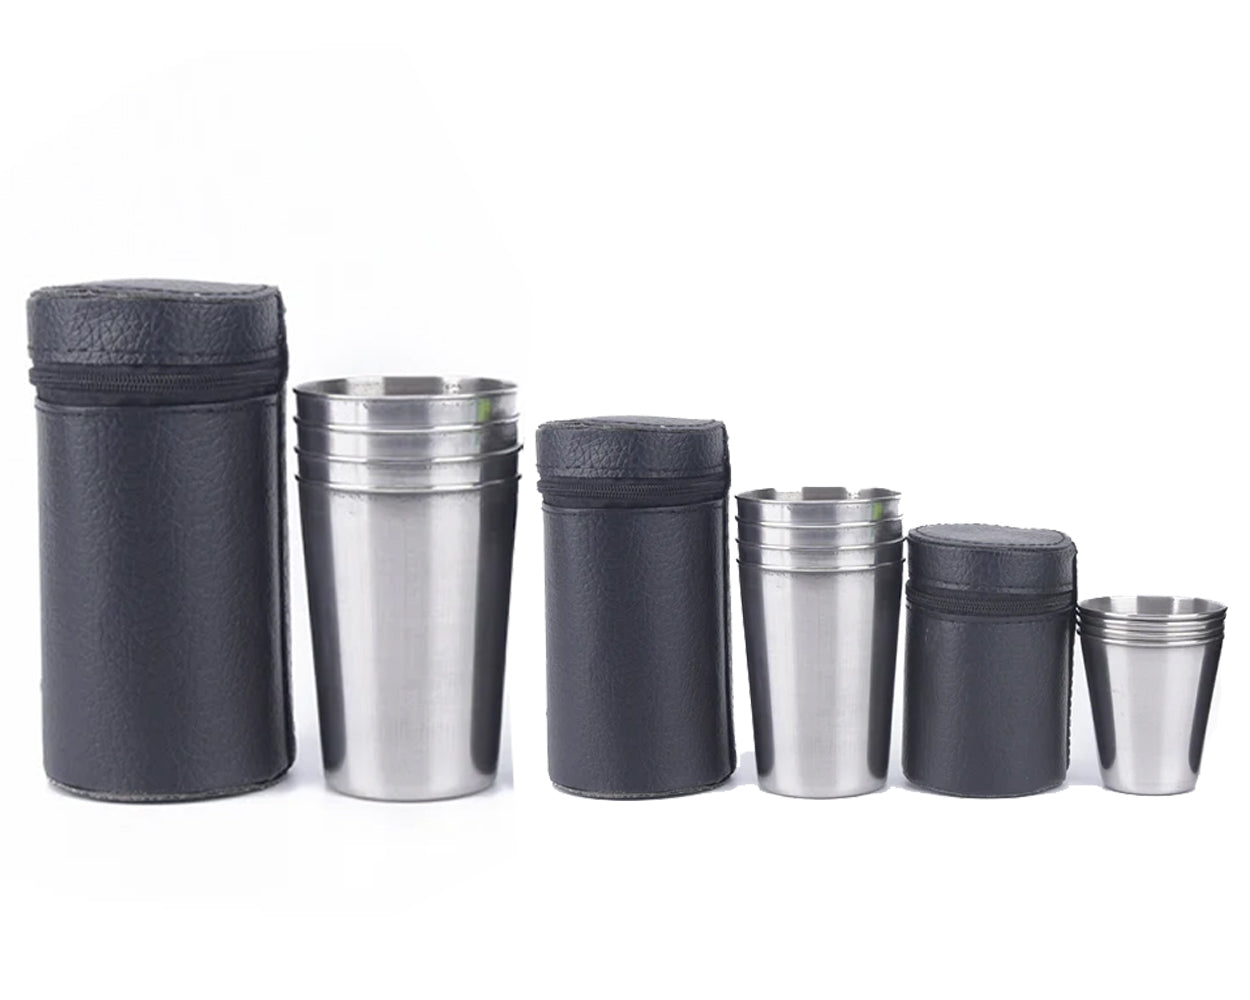 LMA 4 Pack Stainless Steel Travel Cup Set with Carry Pouch FX-8886-C